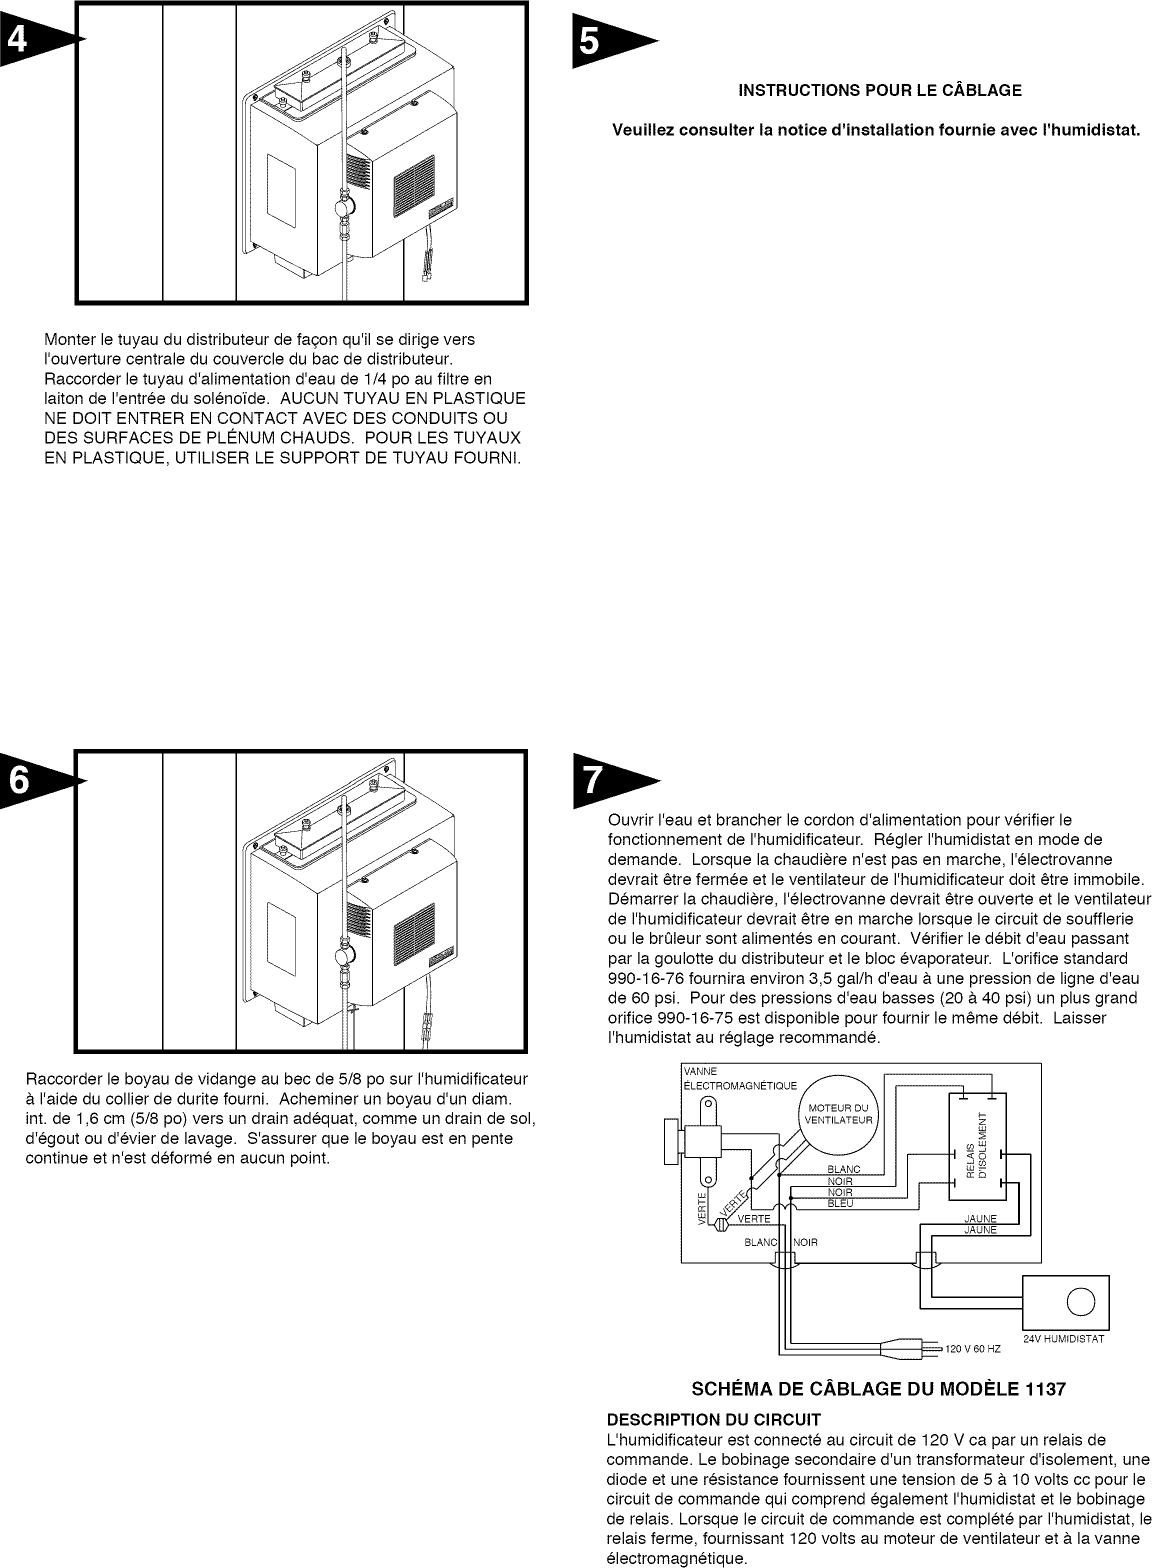 Page 4 of 9 - Generalaire 1137 User Manual  HUMIDIFIER - Manuals And Guides L1002554